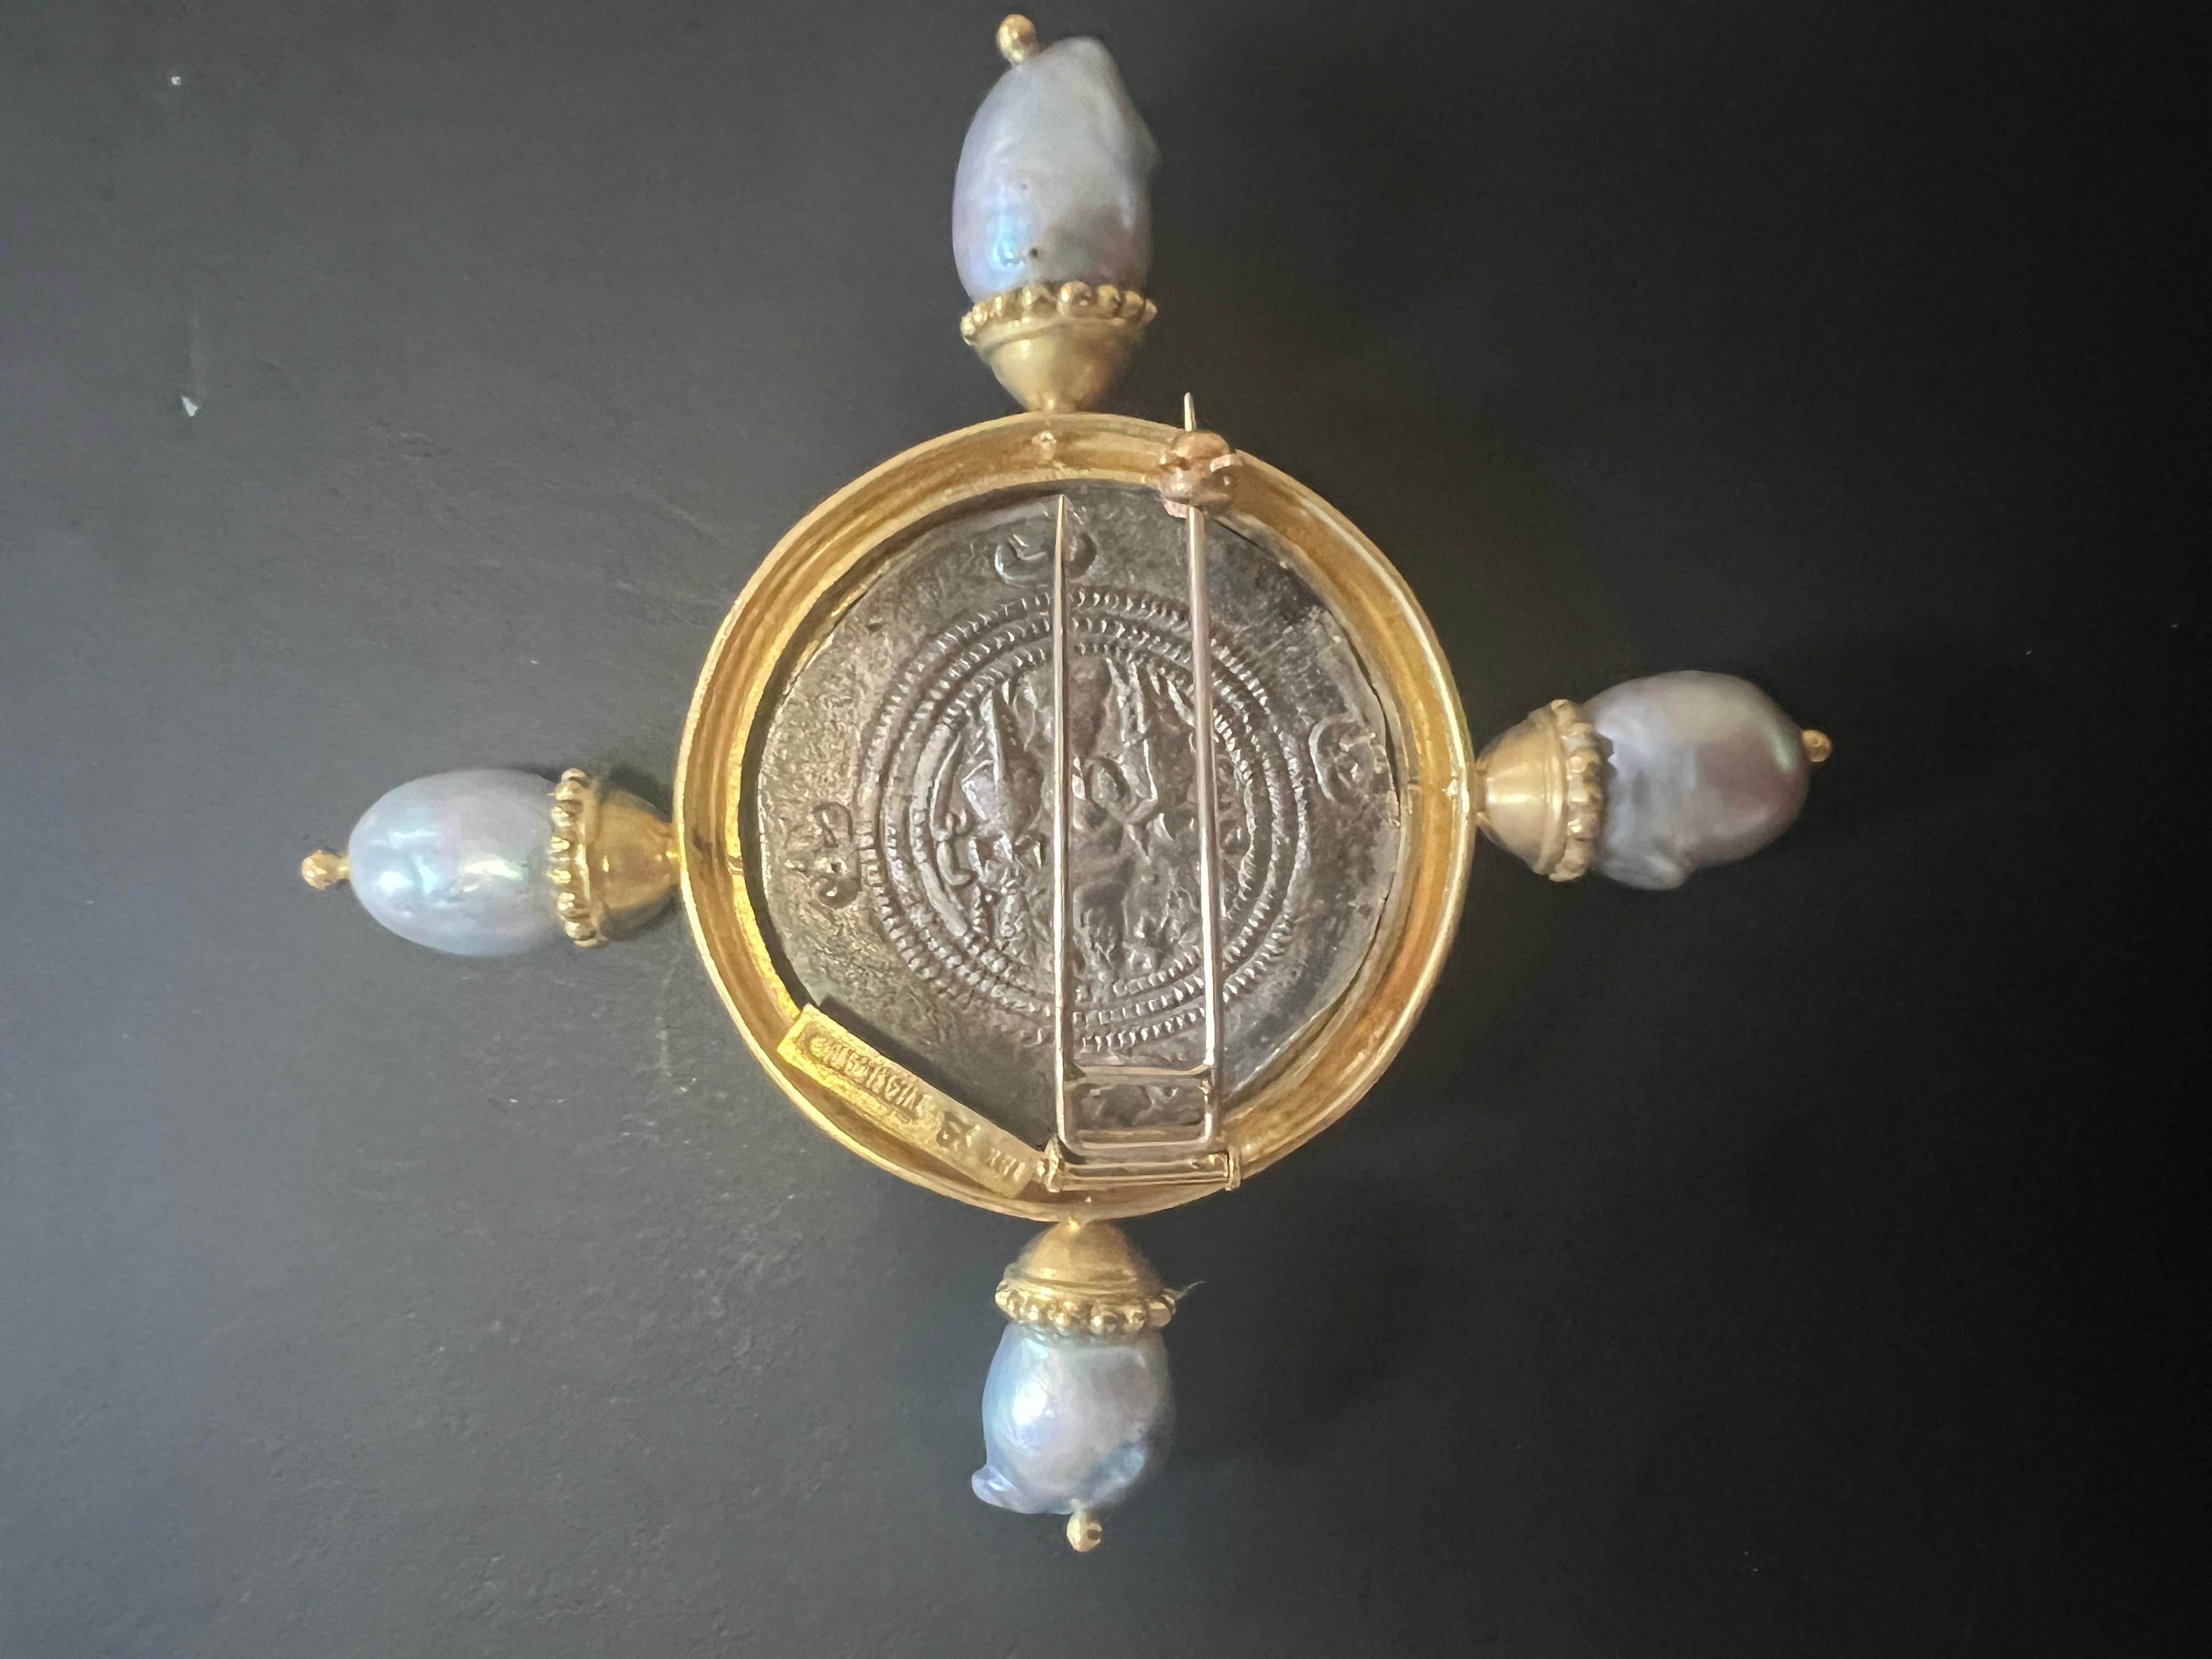 An exquisite Silver Sasanian Coin Depicting Xusro I ( circa 300AD) with Baroque South Sea Pearls in an 18K Gold Frame Brooch or Pin by the legendary jewelry designer Elizabeth Locke. 
The finely crafted brooch features an 18 K yellow solid frame